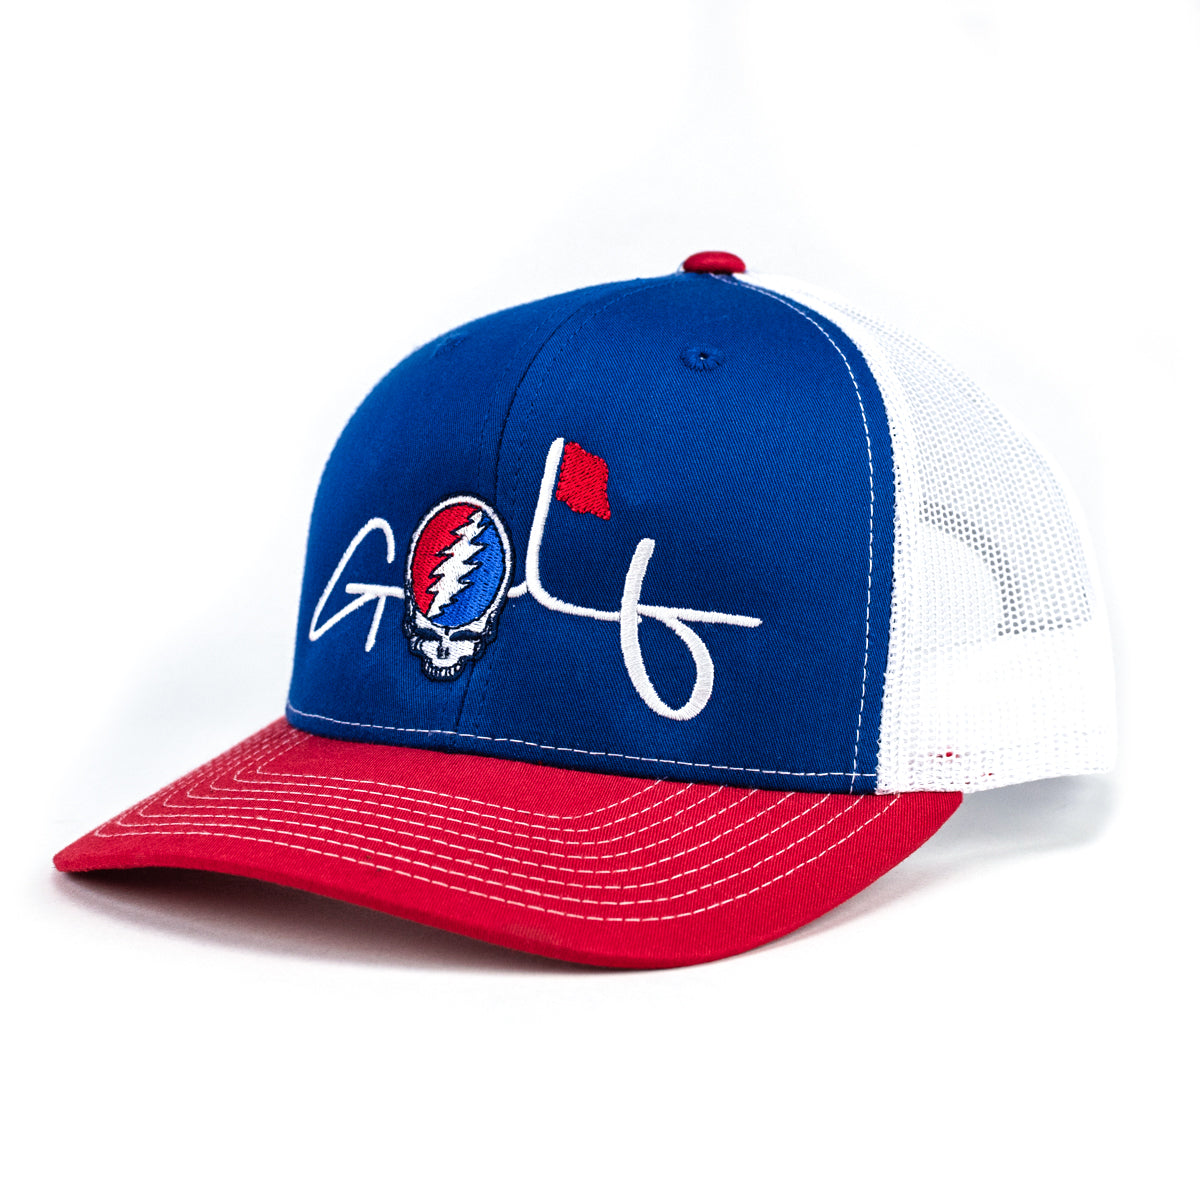 Steal Your Face Trucker